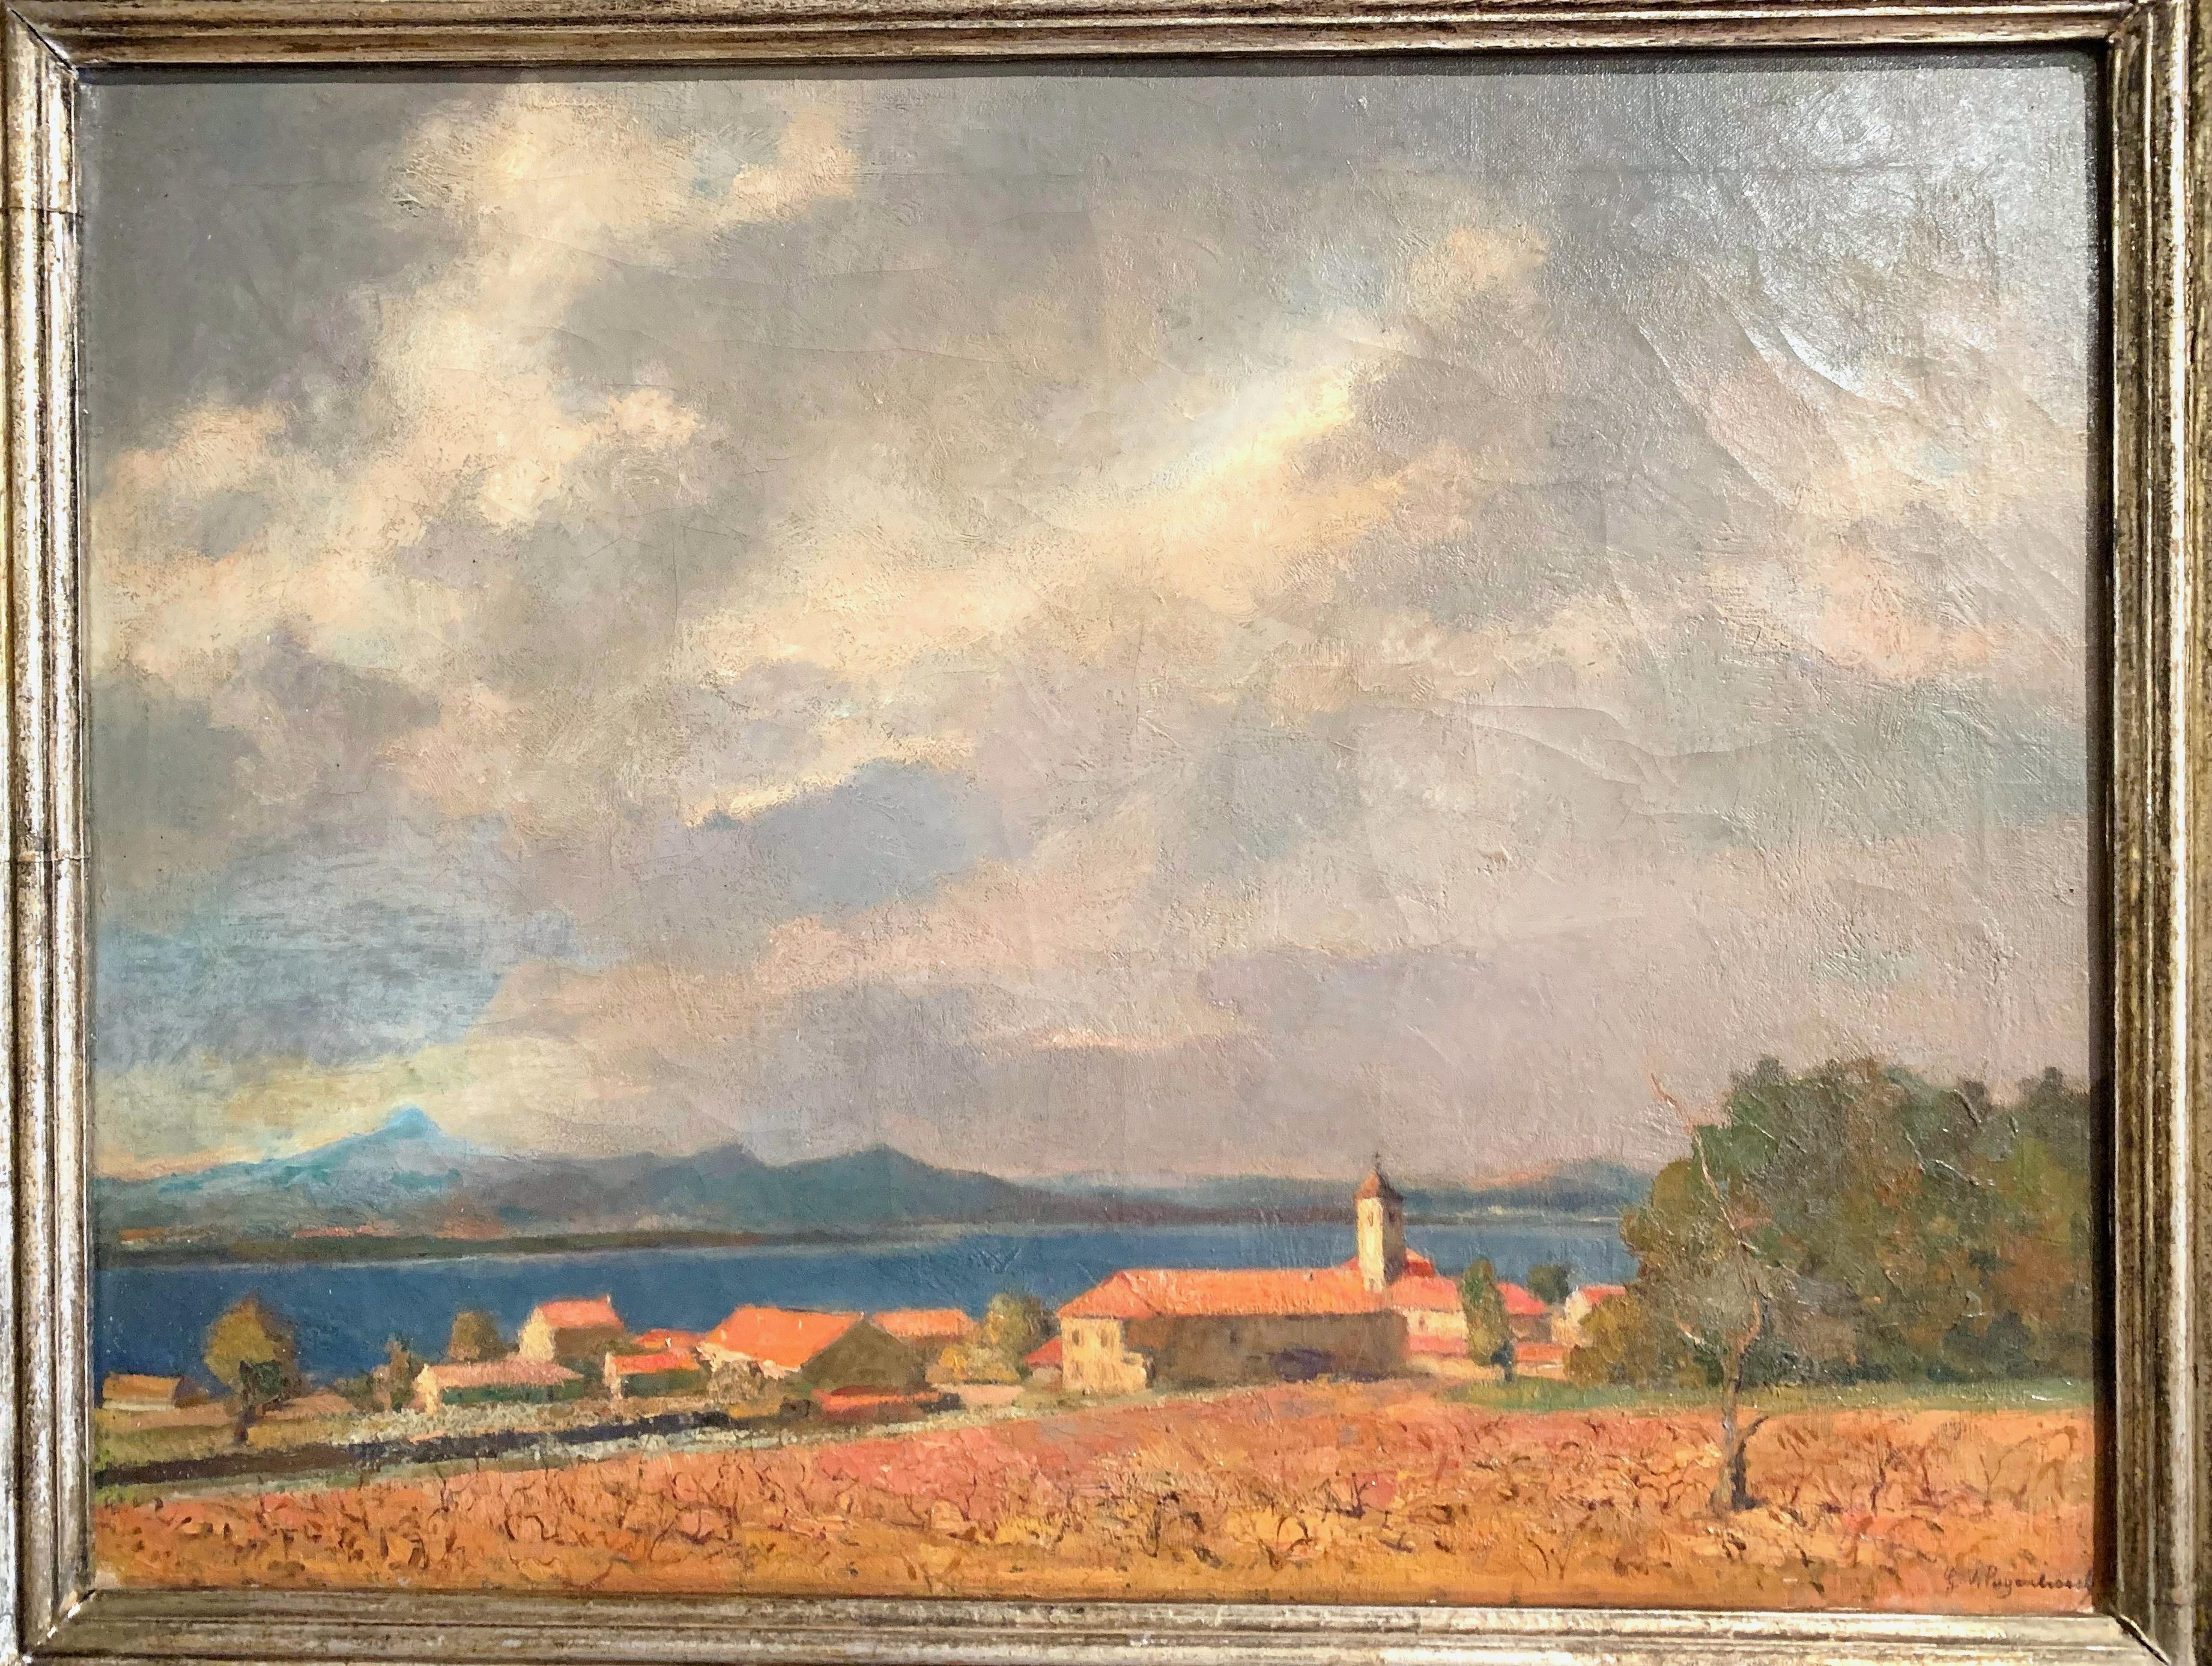 Set in the original silvered leaf frame and painted on canvas, the artwork depicts the island of Porquerolles on the French Riviera, in the south of France; it is signed in the lower right corner by the artist, Gregoor Van Puyenbroeck and dated on